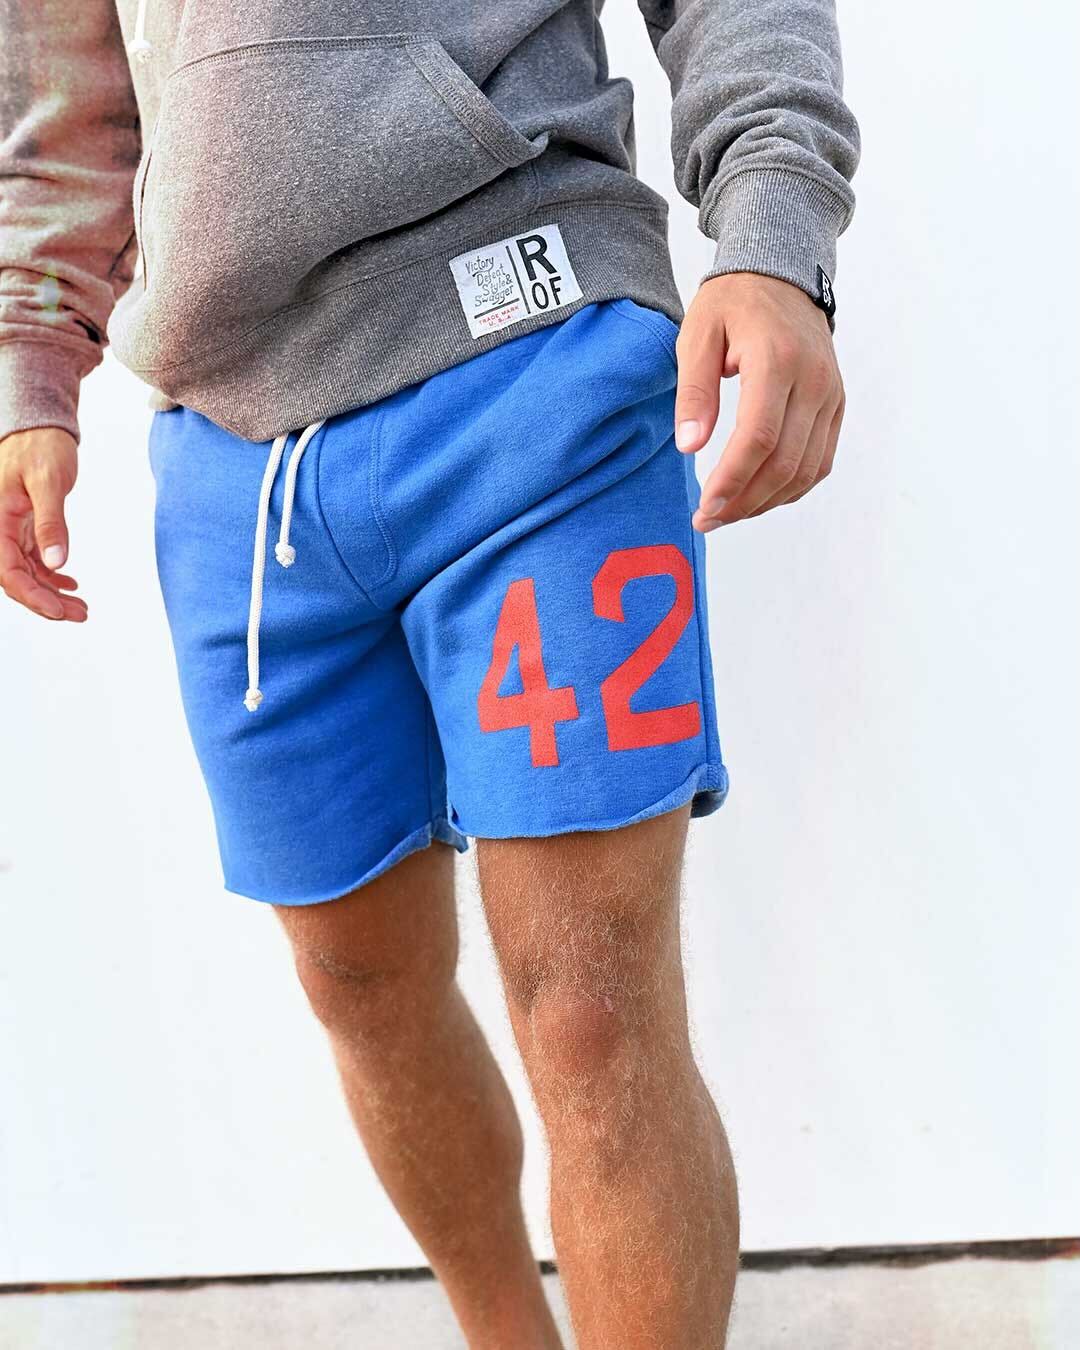 Jackie Robinson #42 Blue Shorts - Roots of Fight Canada